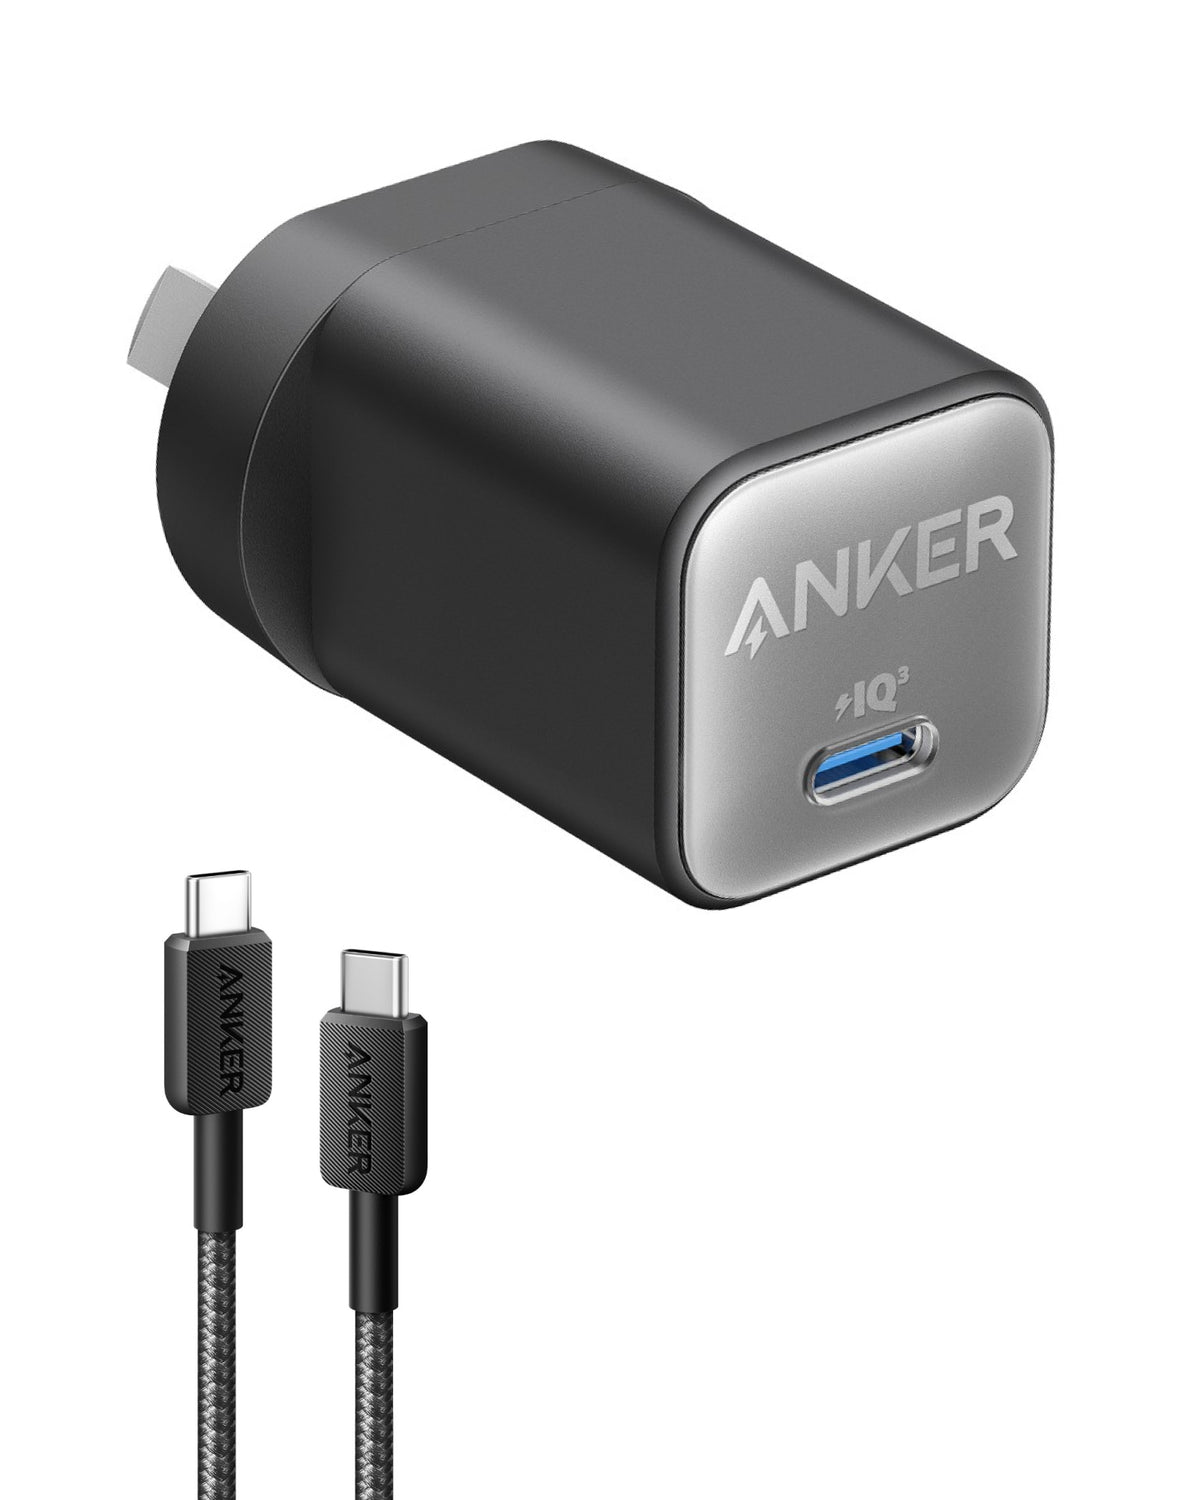 Anker 511 Charger (Nano 3, 30W) and Anker 322 USB-C to USB-C Cable